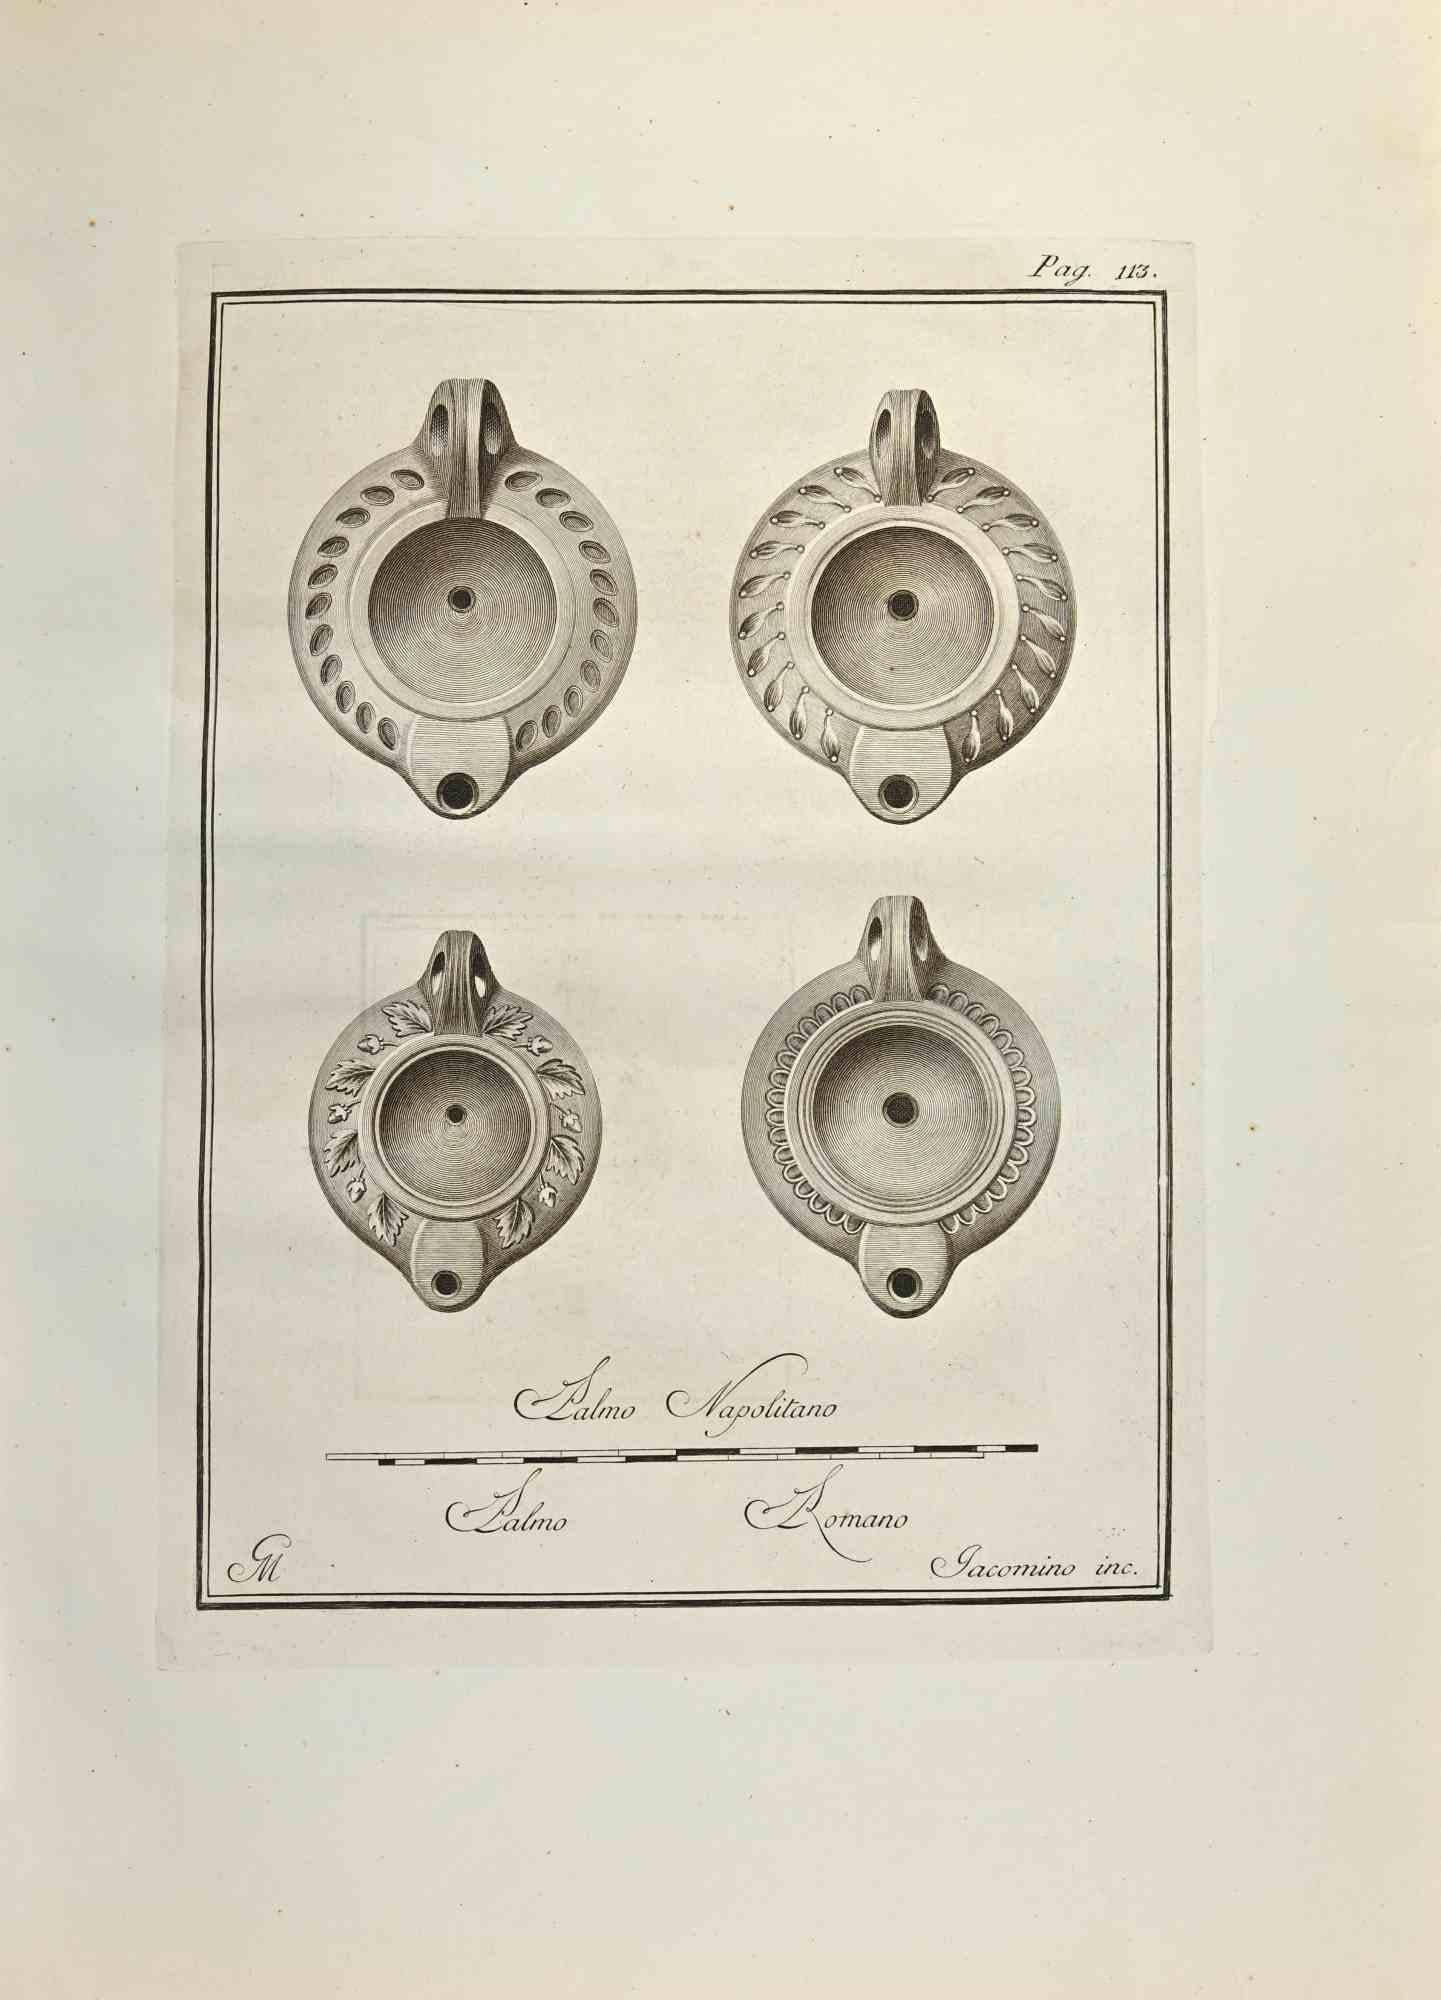 Pompeian Style Oil Lamps from "Antiquities of Herculaneum" is an etching on paper realized by Marcantonio Iacomino in the 18th Century.

Signed on the plate.

Good conditions with aged margins.

The etching belongs to the print suite “Antiquities of